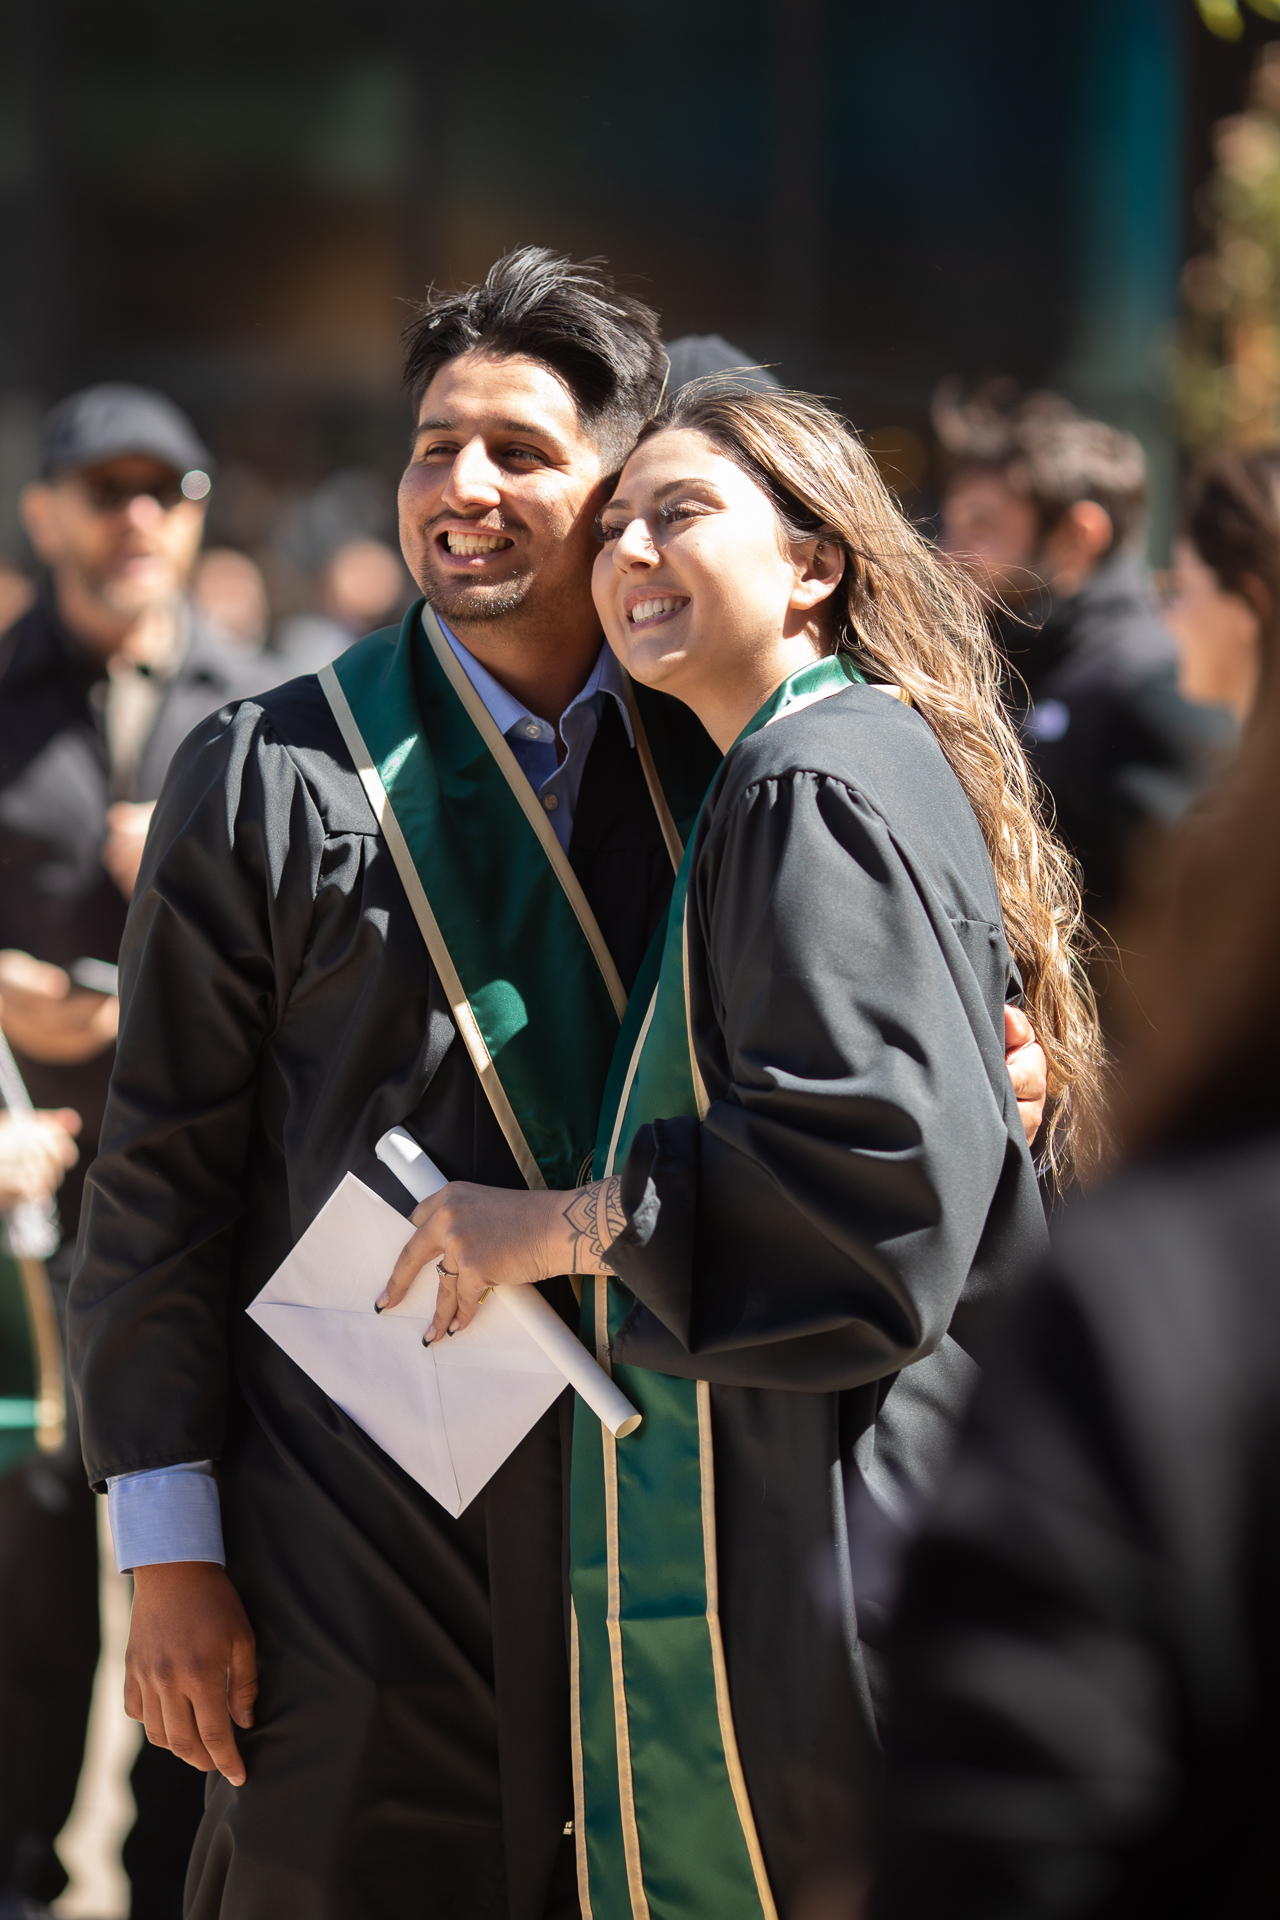 Two graduating students, outside, smiling, in academic regalia, one holding a diploma